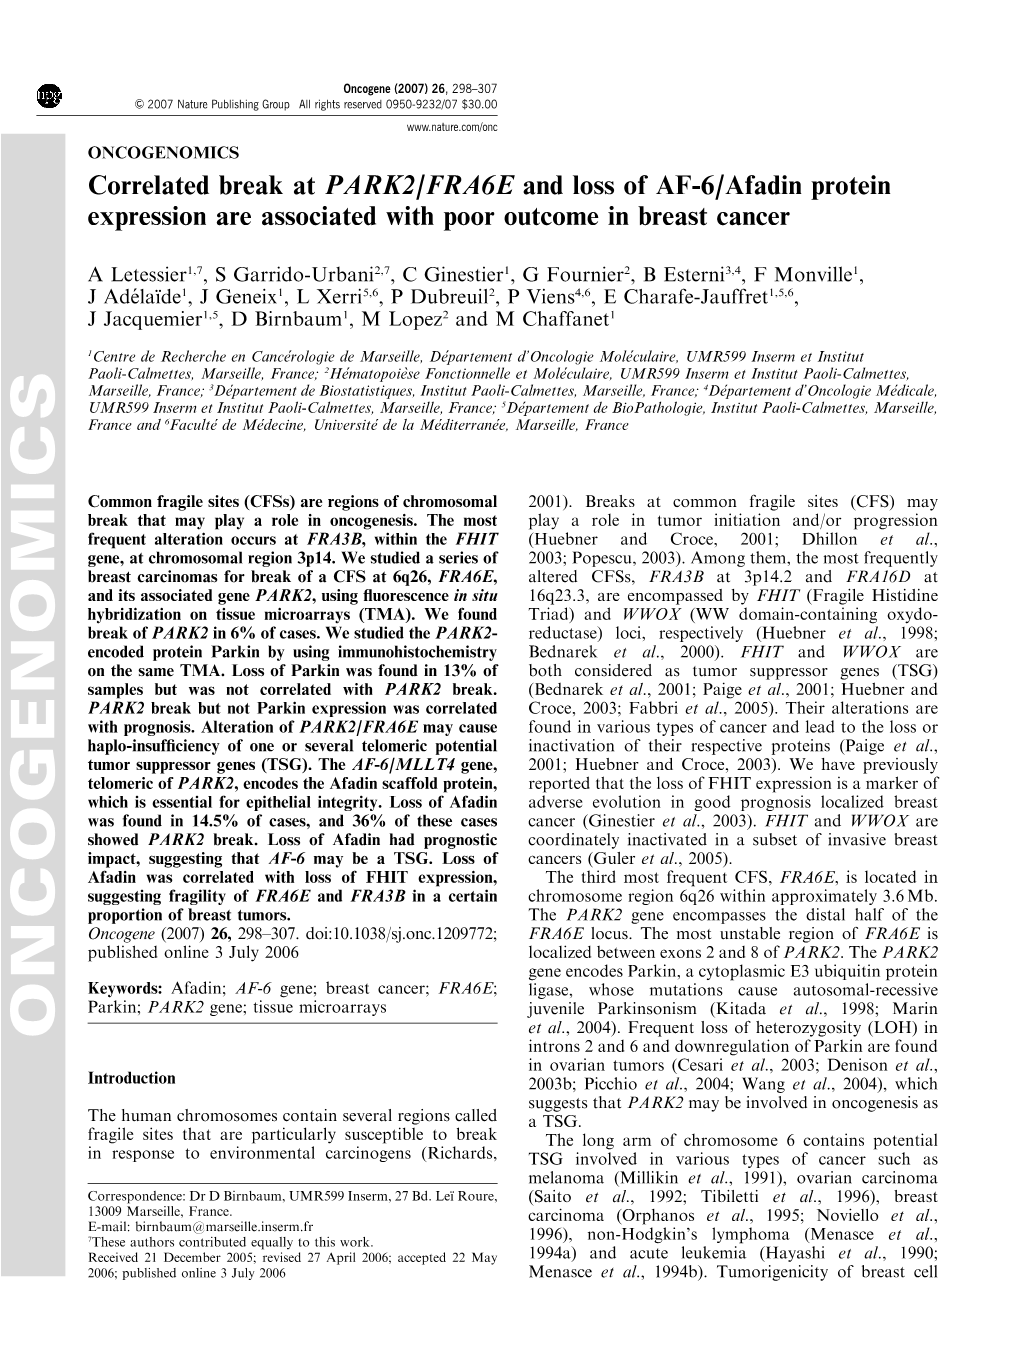 Correlated Break at PARK2/FRA6E and Loss of AF-6/Afadin Protein Expression Are Associated with Poor Outcome in Breast Cancer